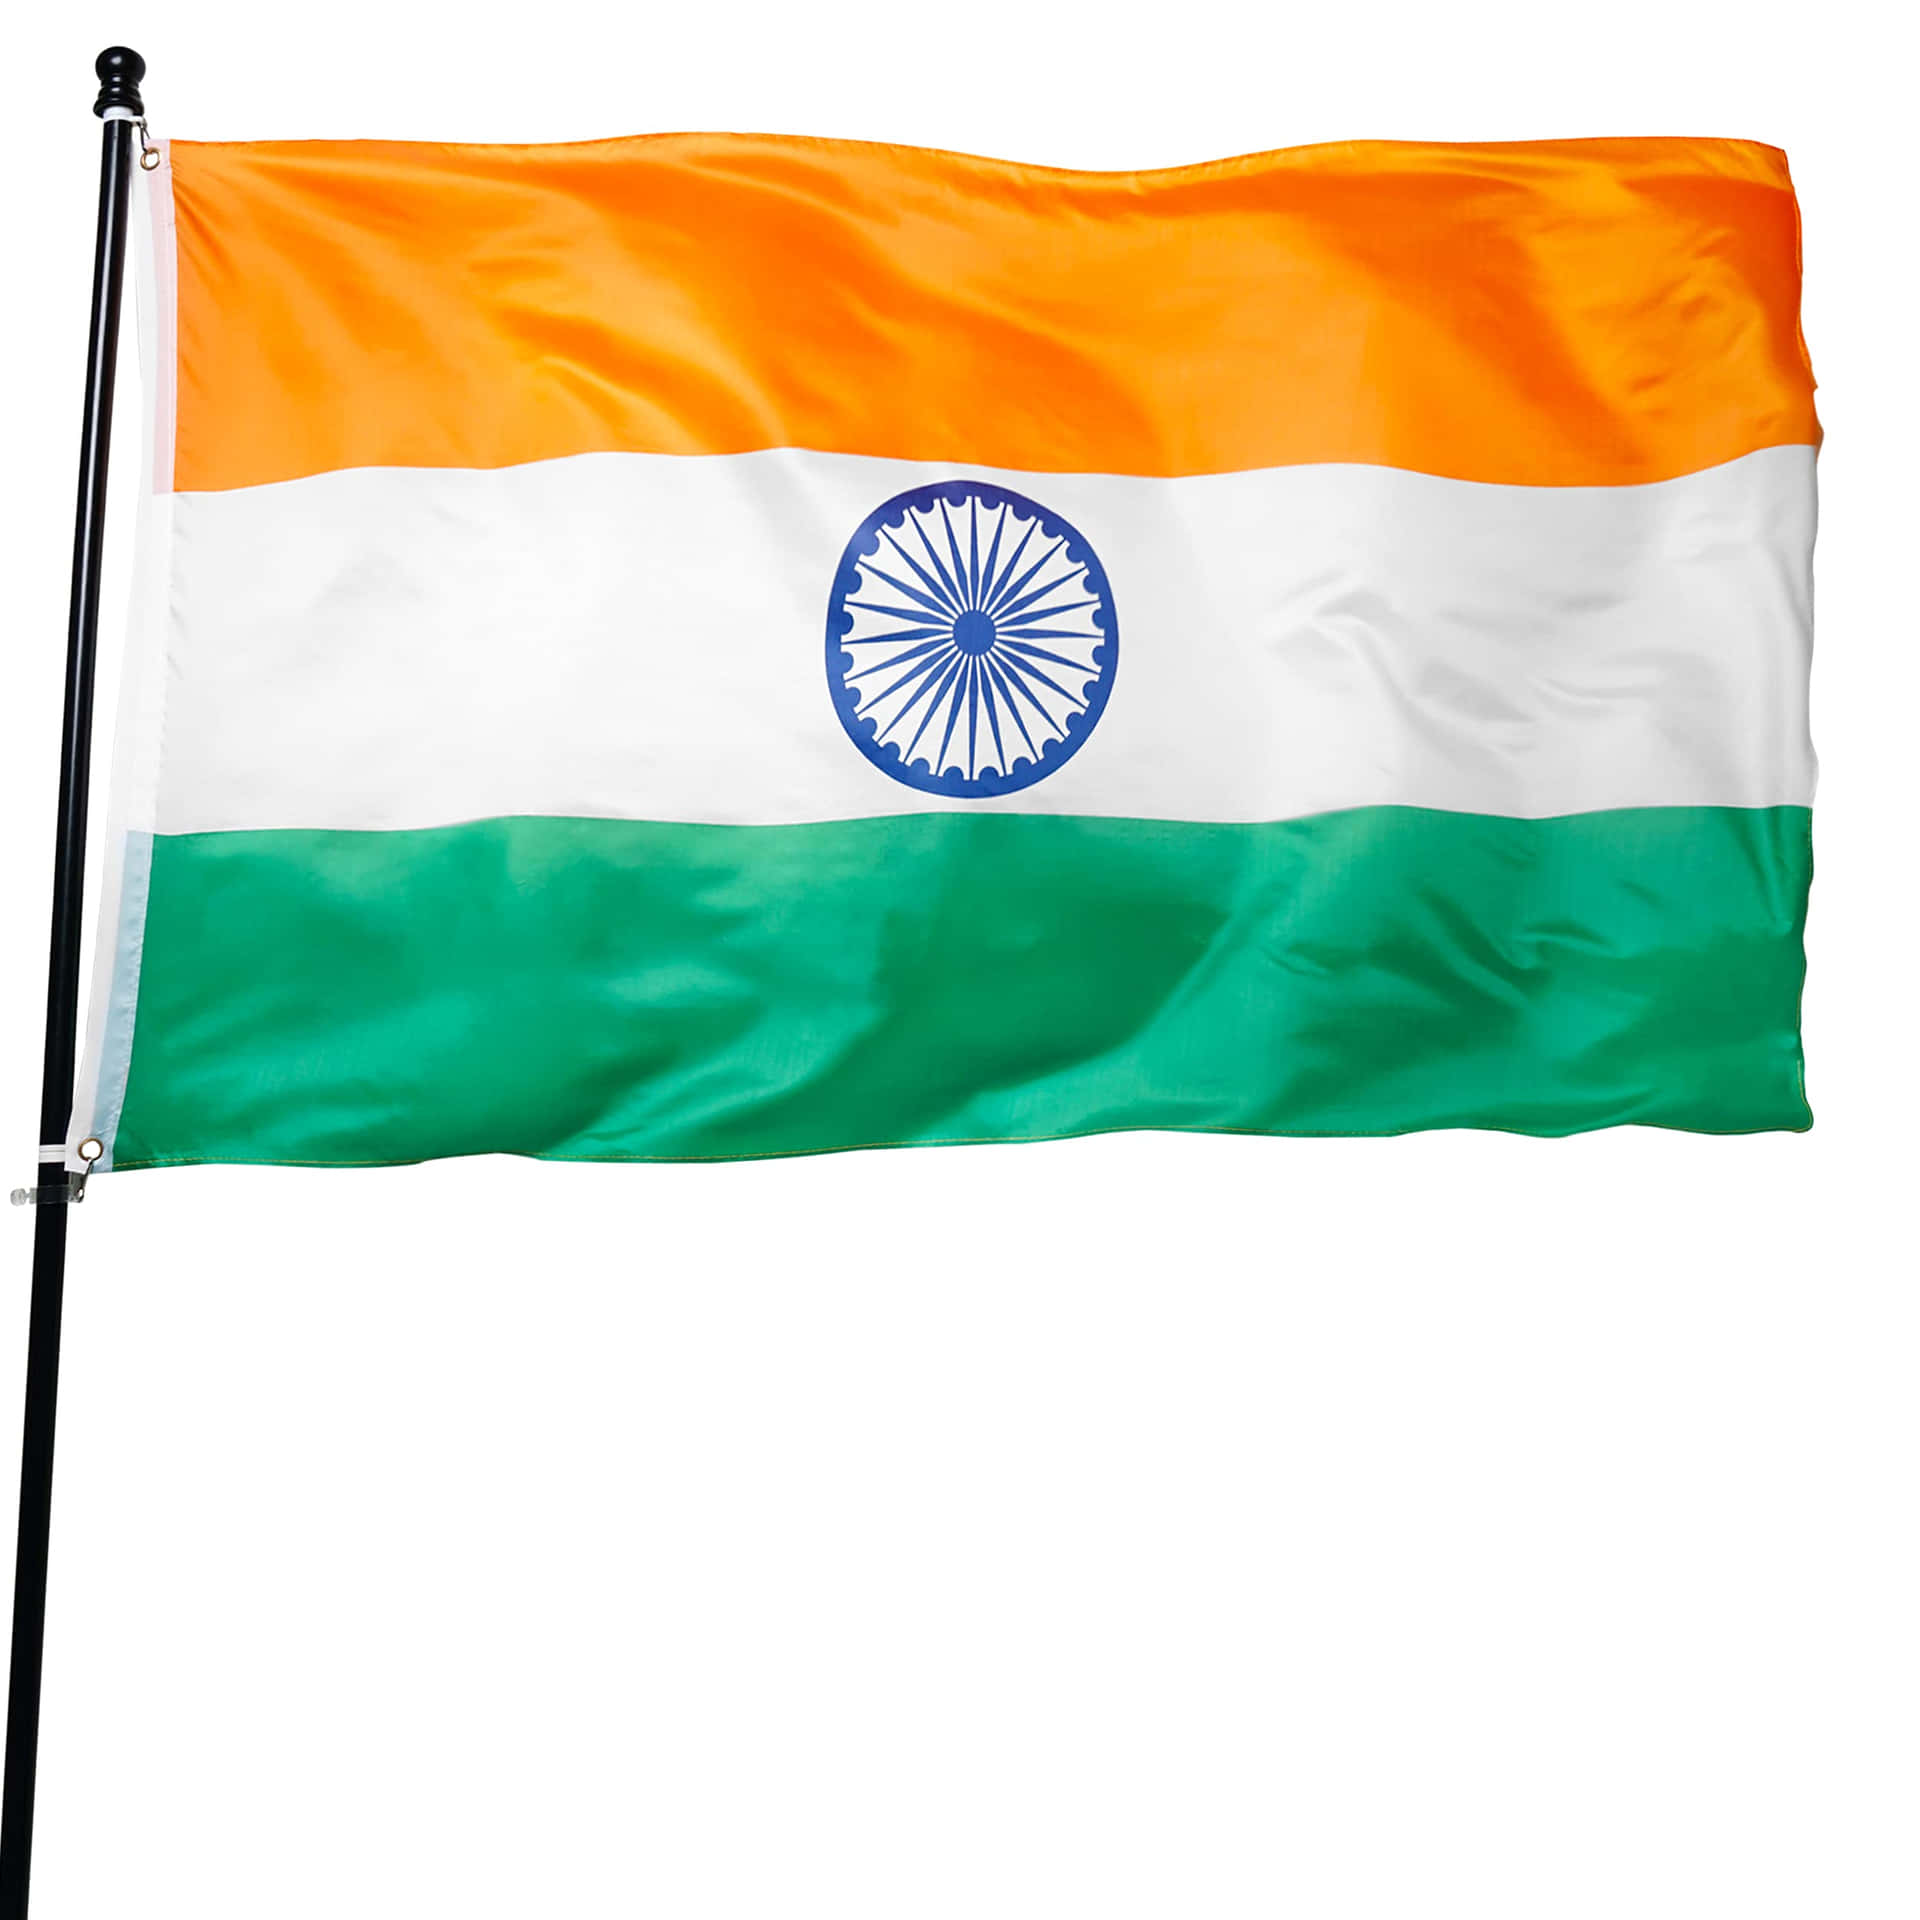 The Indian Flag: A symbol of hope, patriotism and pride